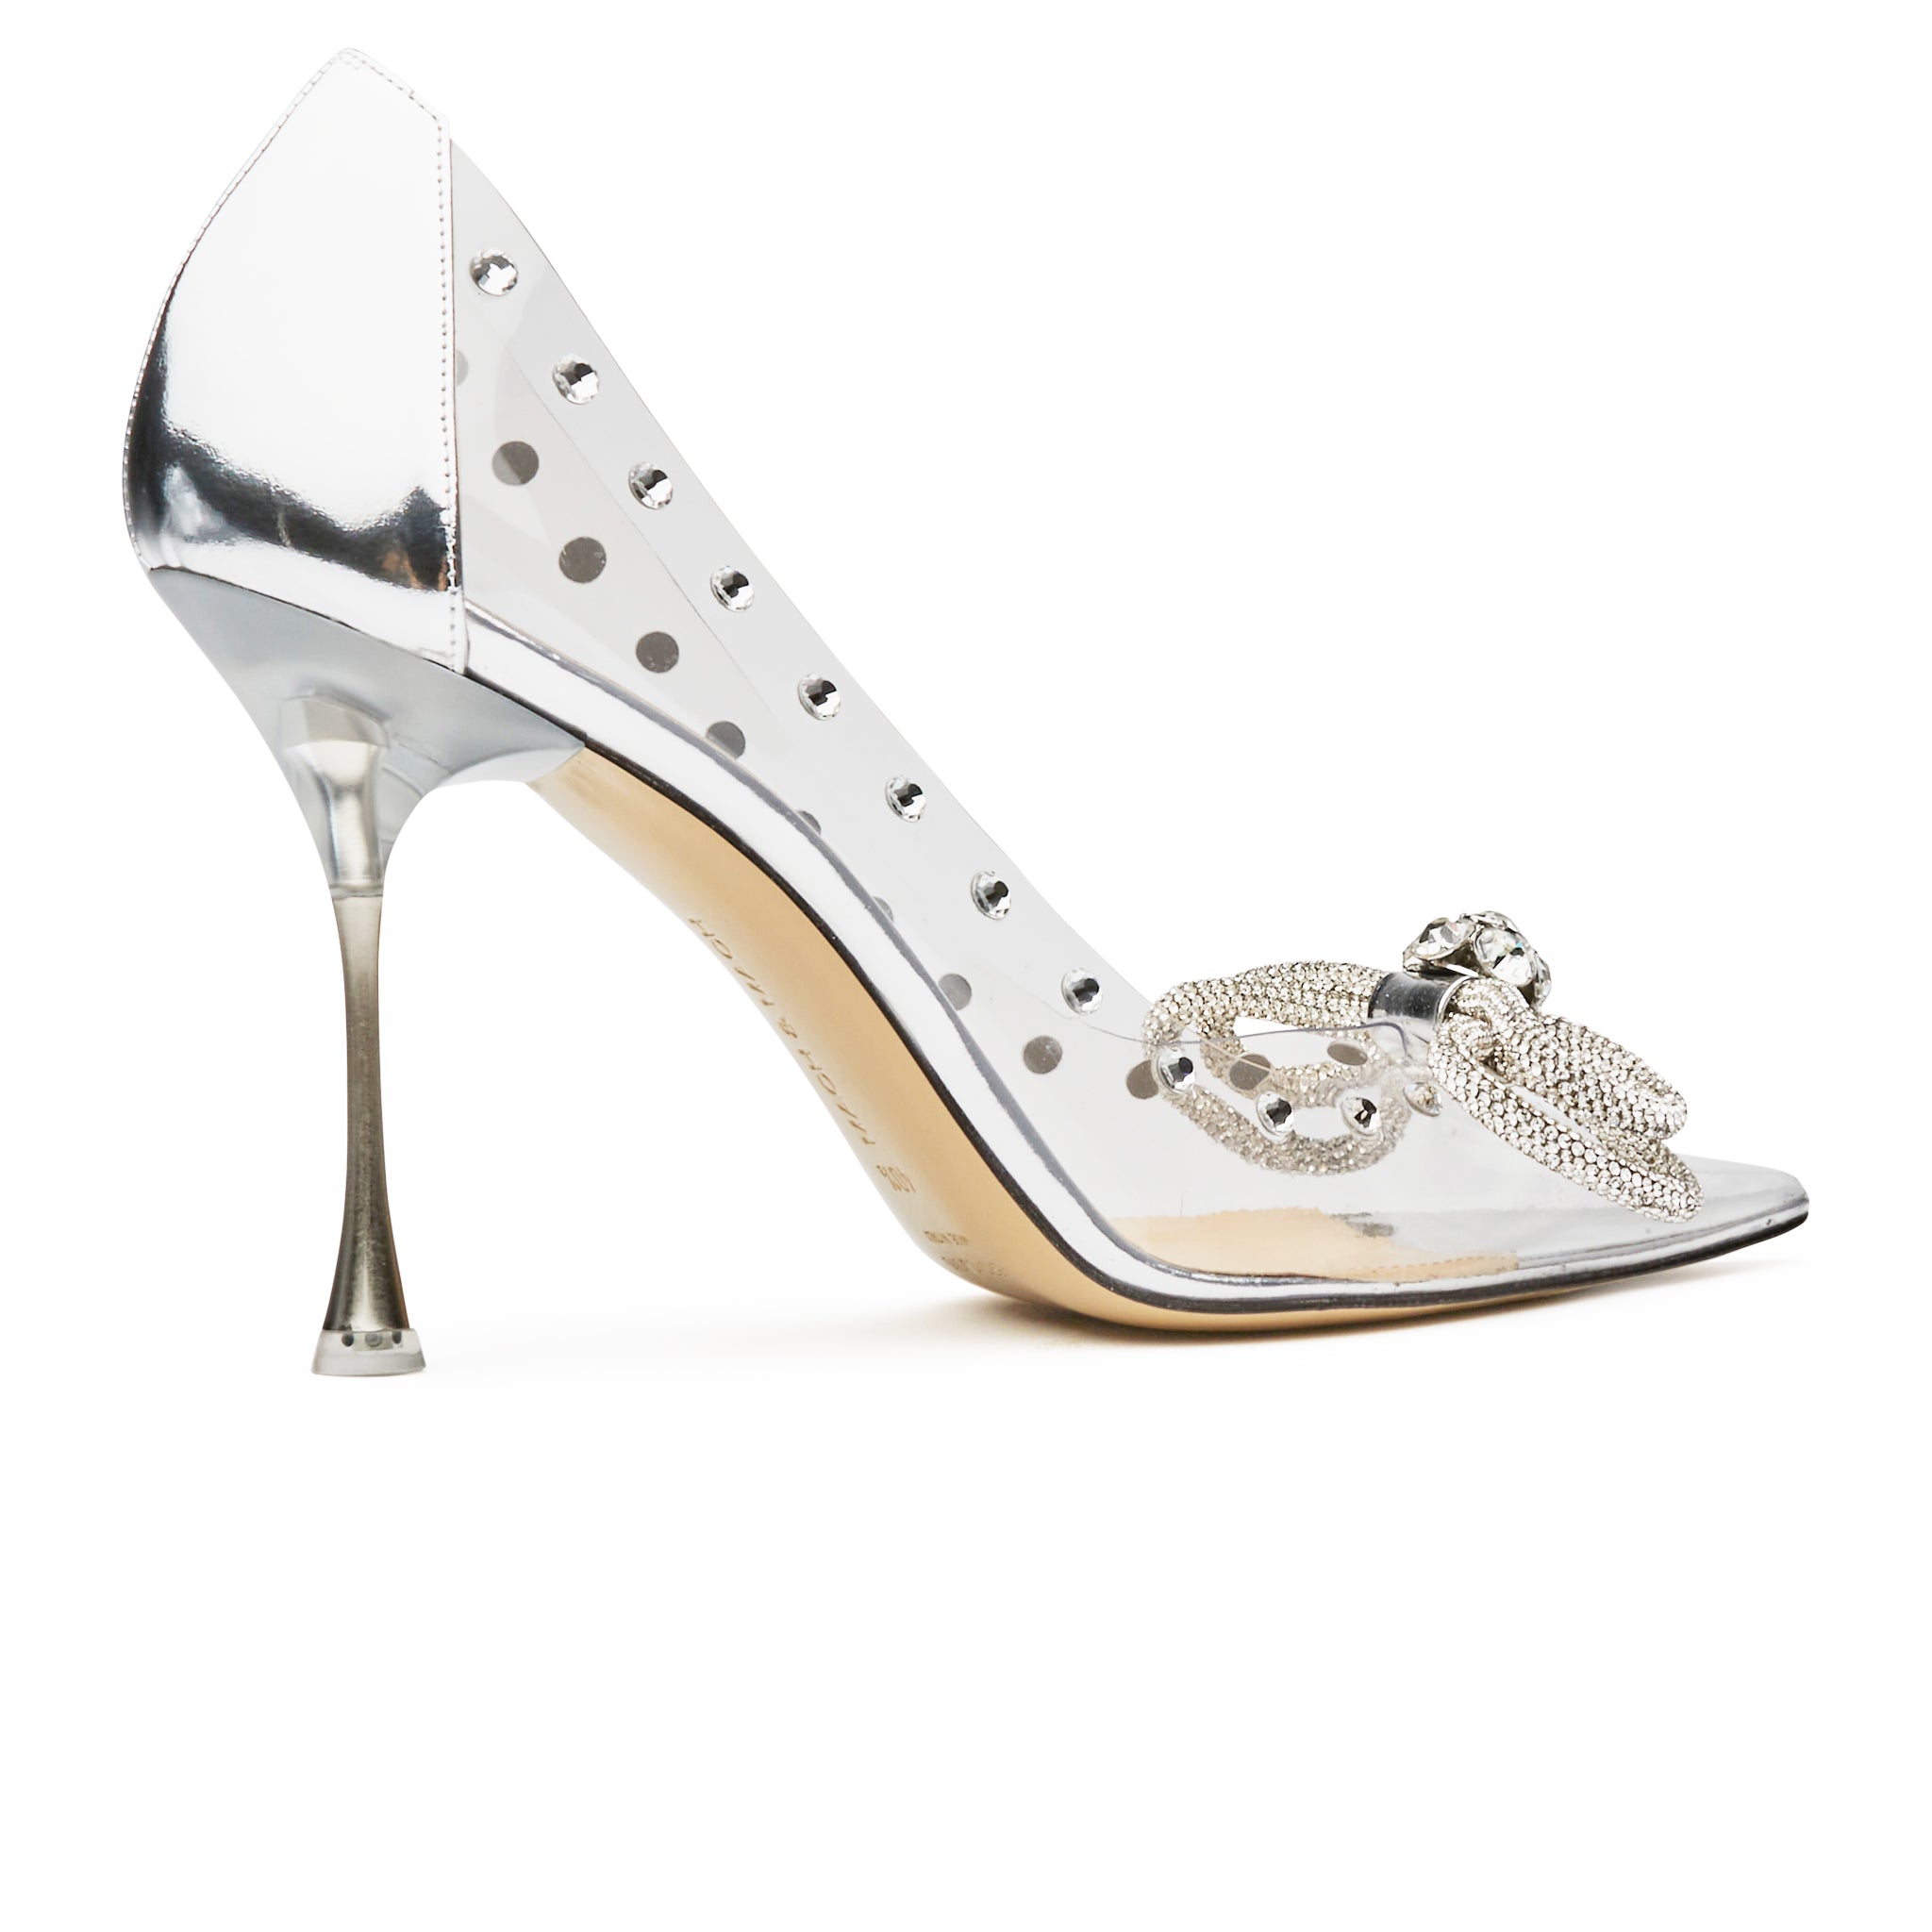 Mach & Mach Double Bow Crystal Embellished PVC 100MM Heels